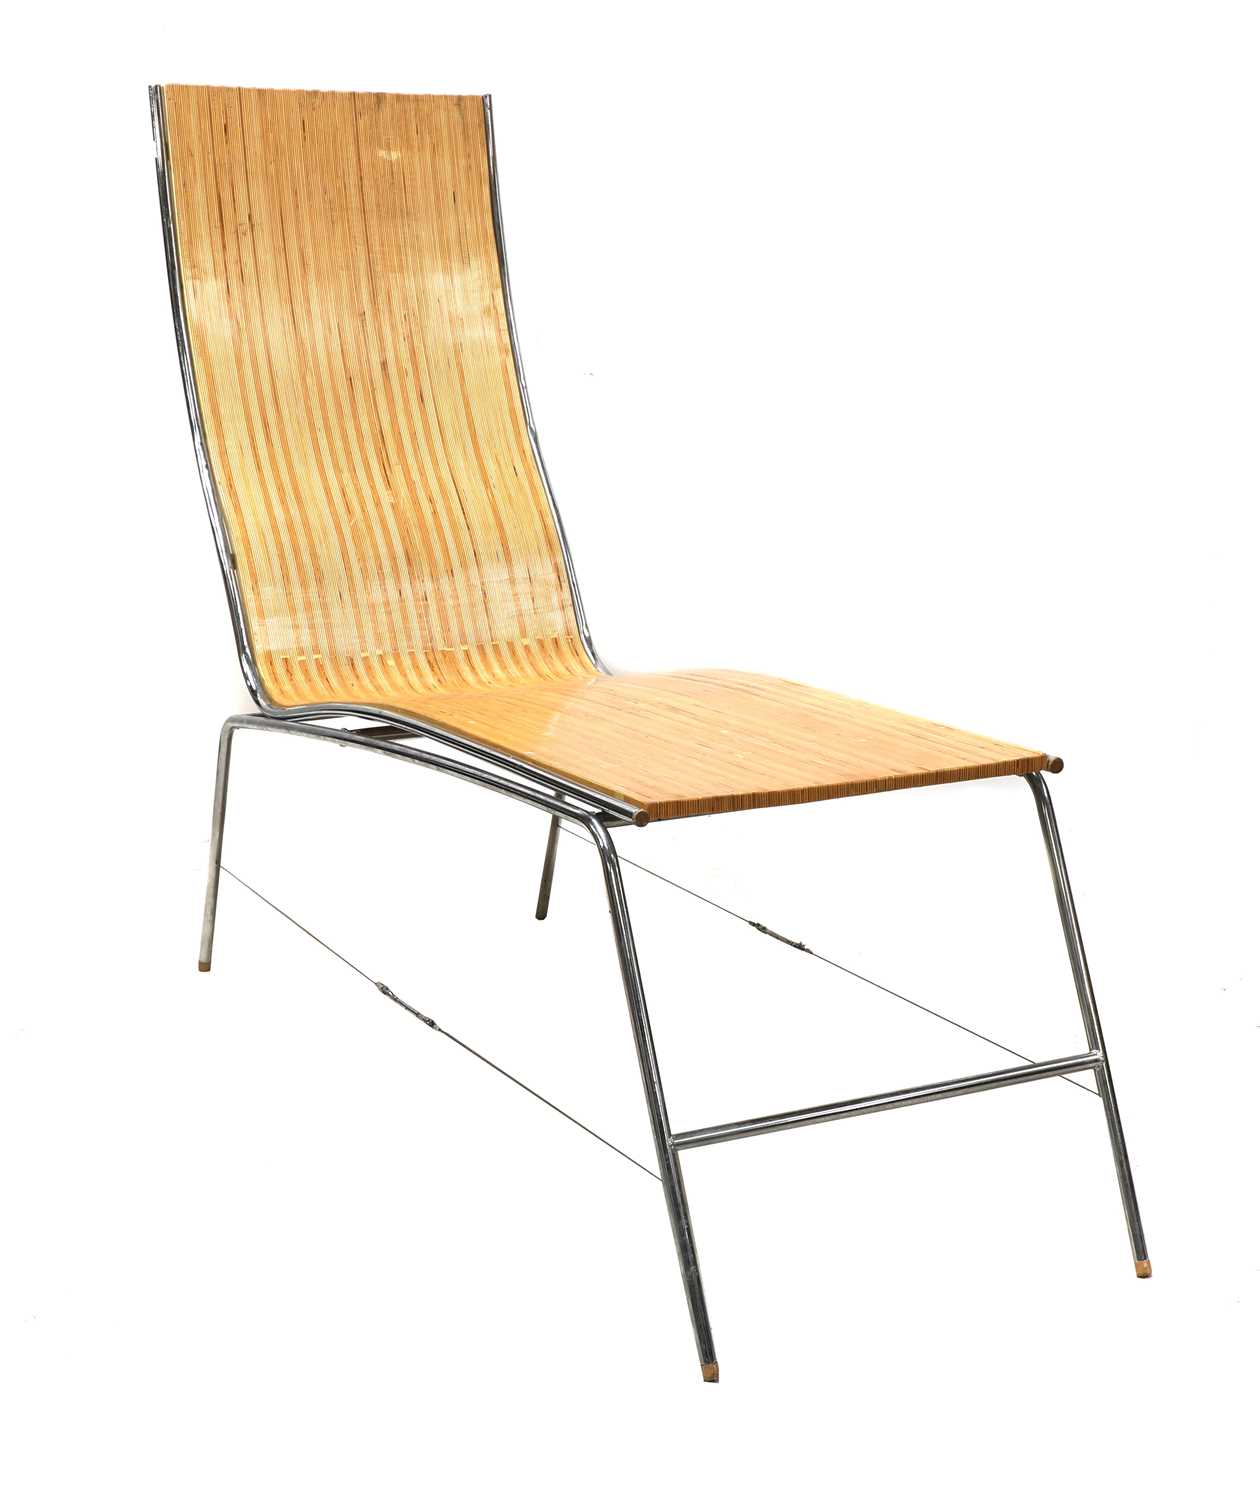 A laminated wood chaise lounge,